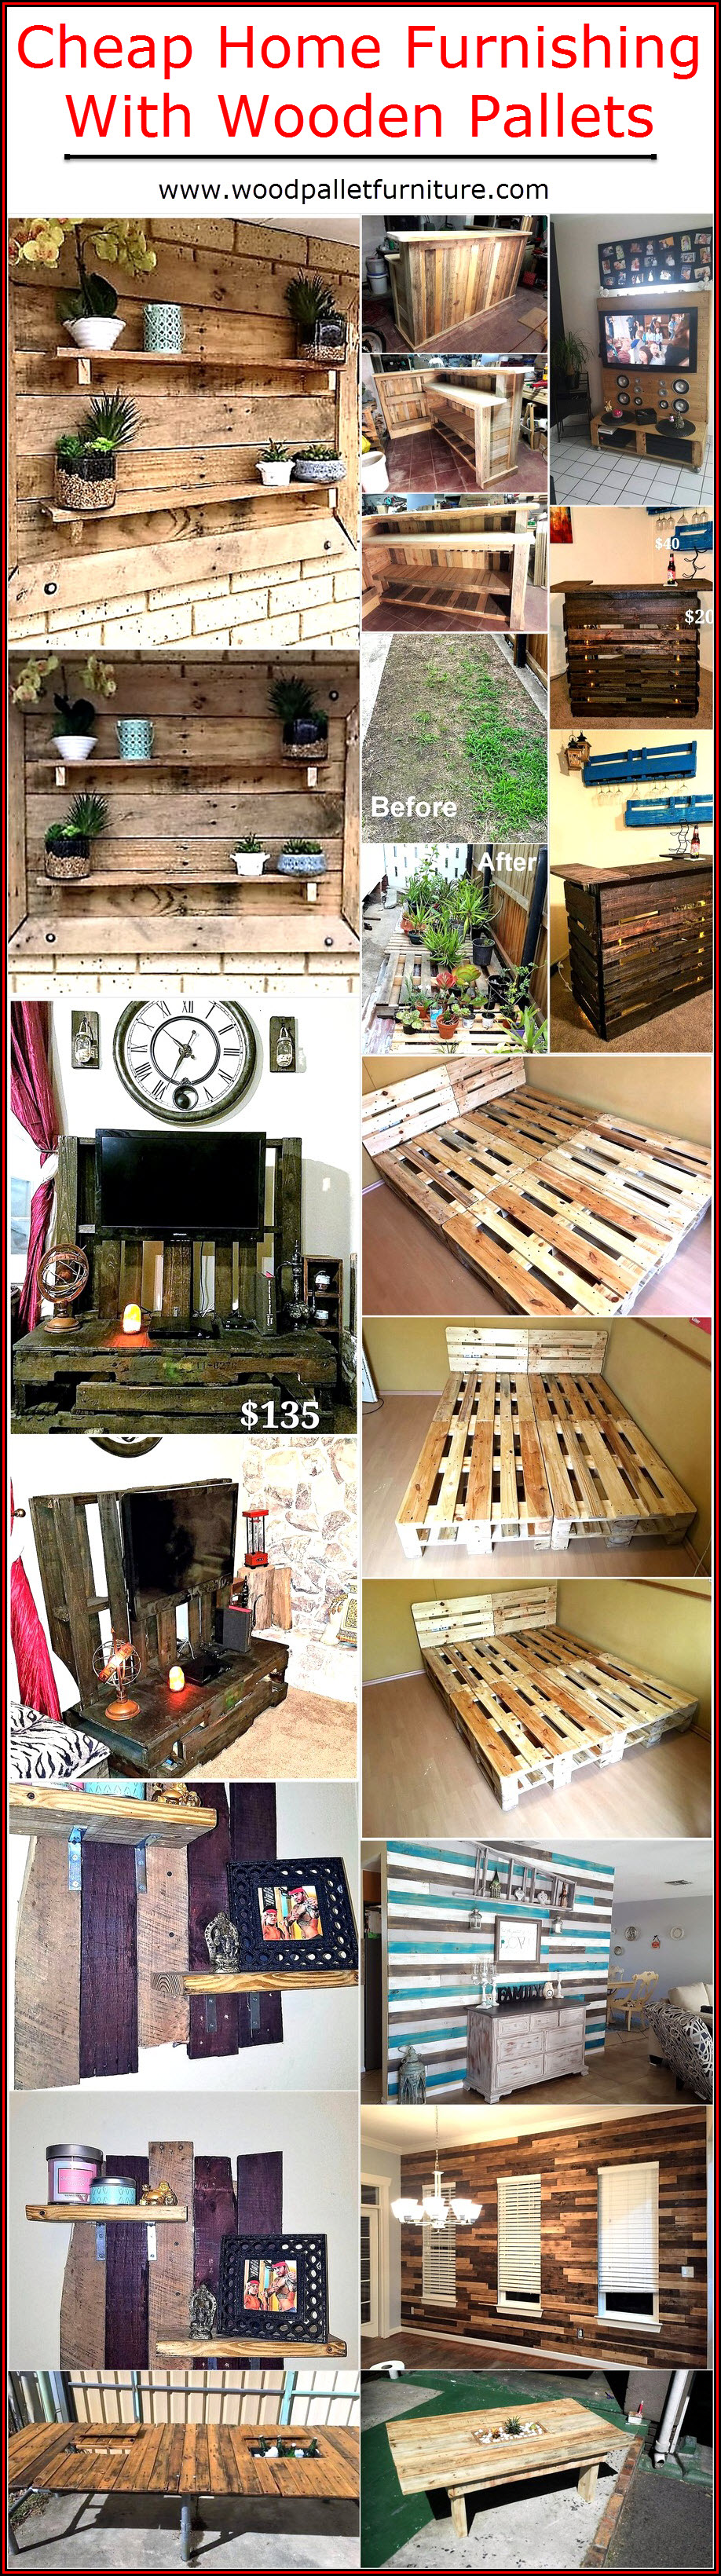 cheap-home-furnishing-with-wooden-pallets